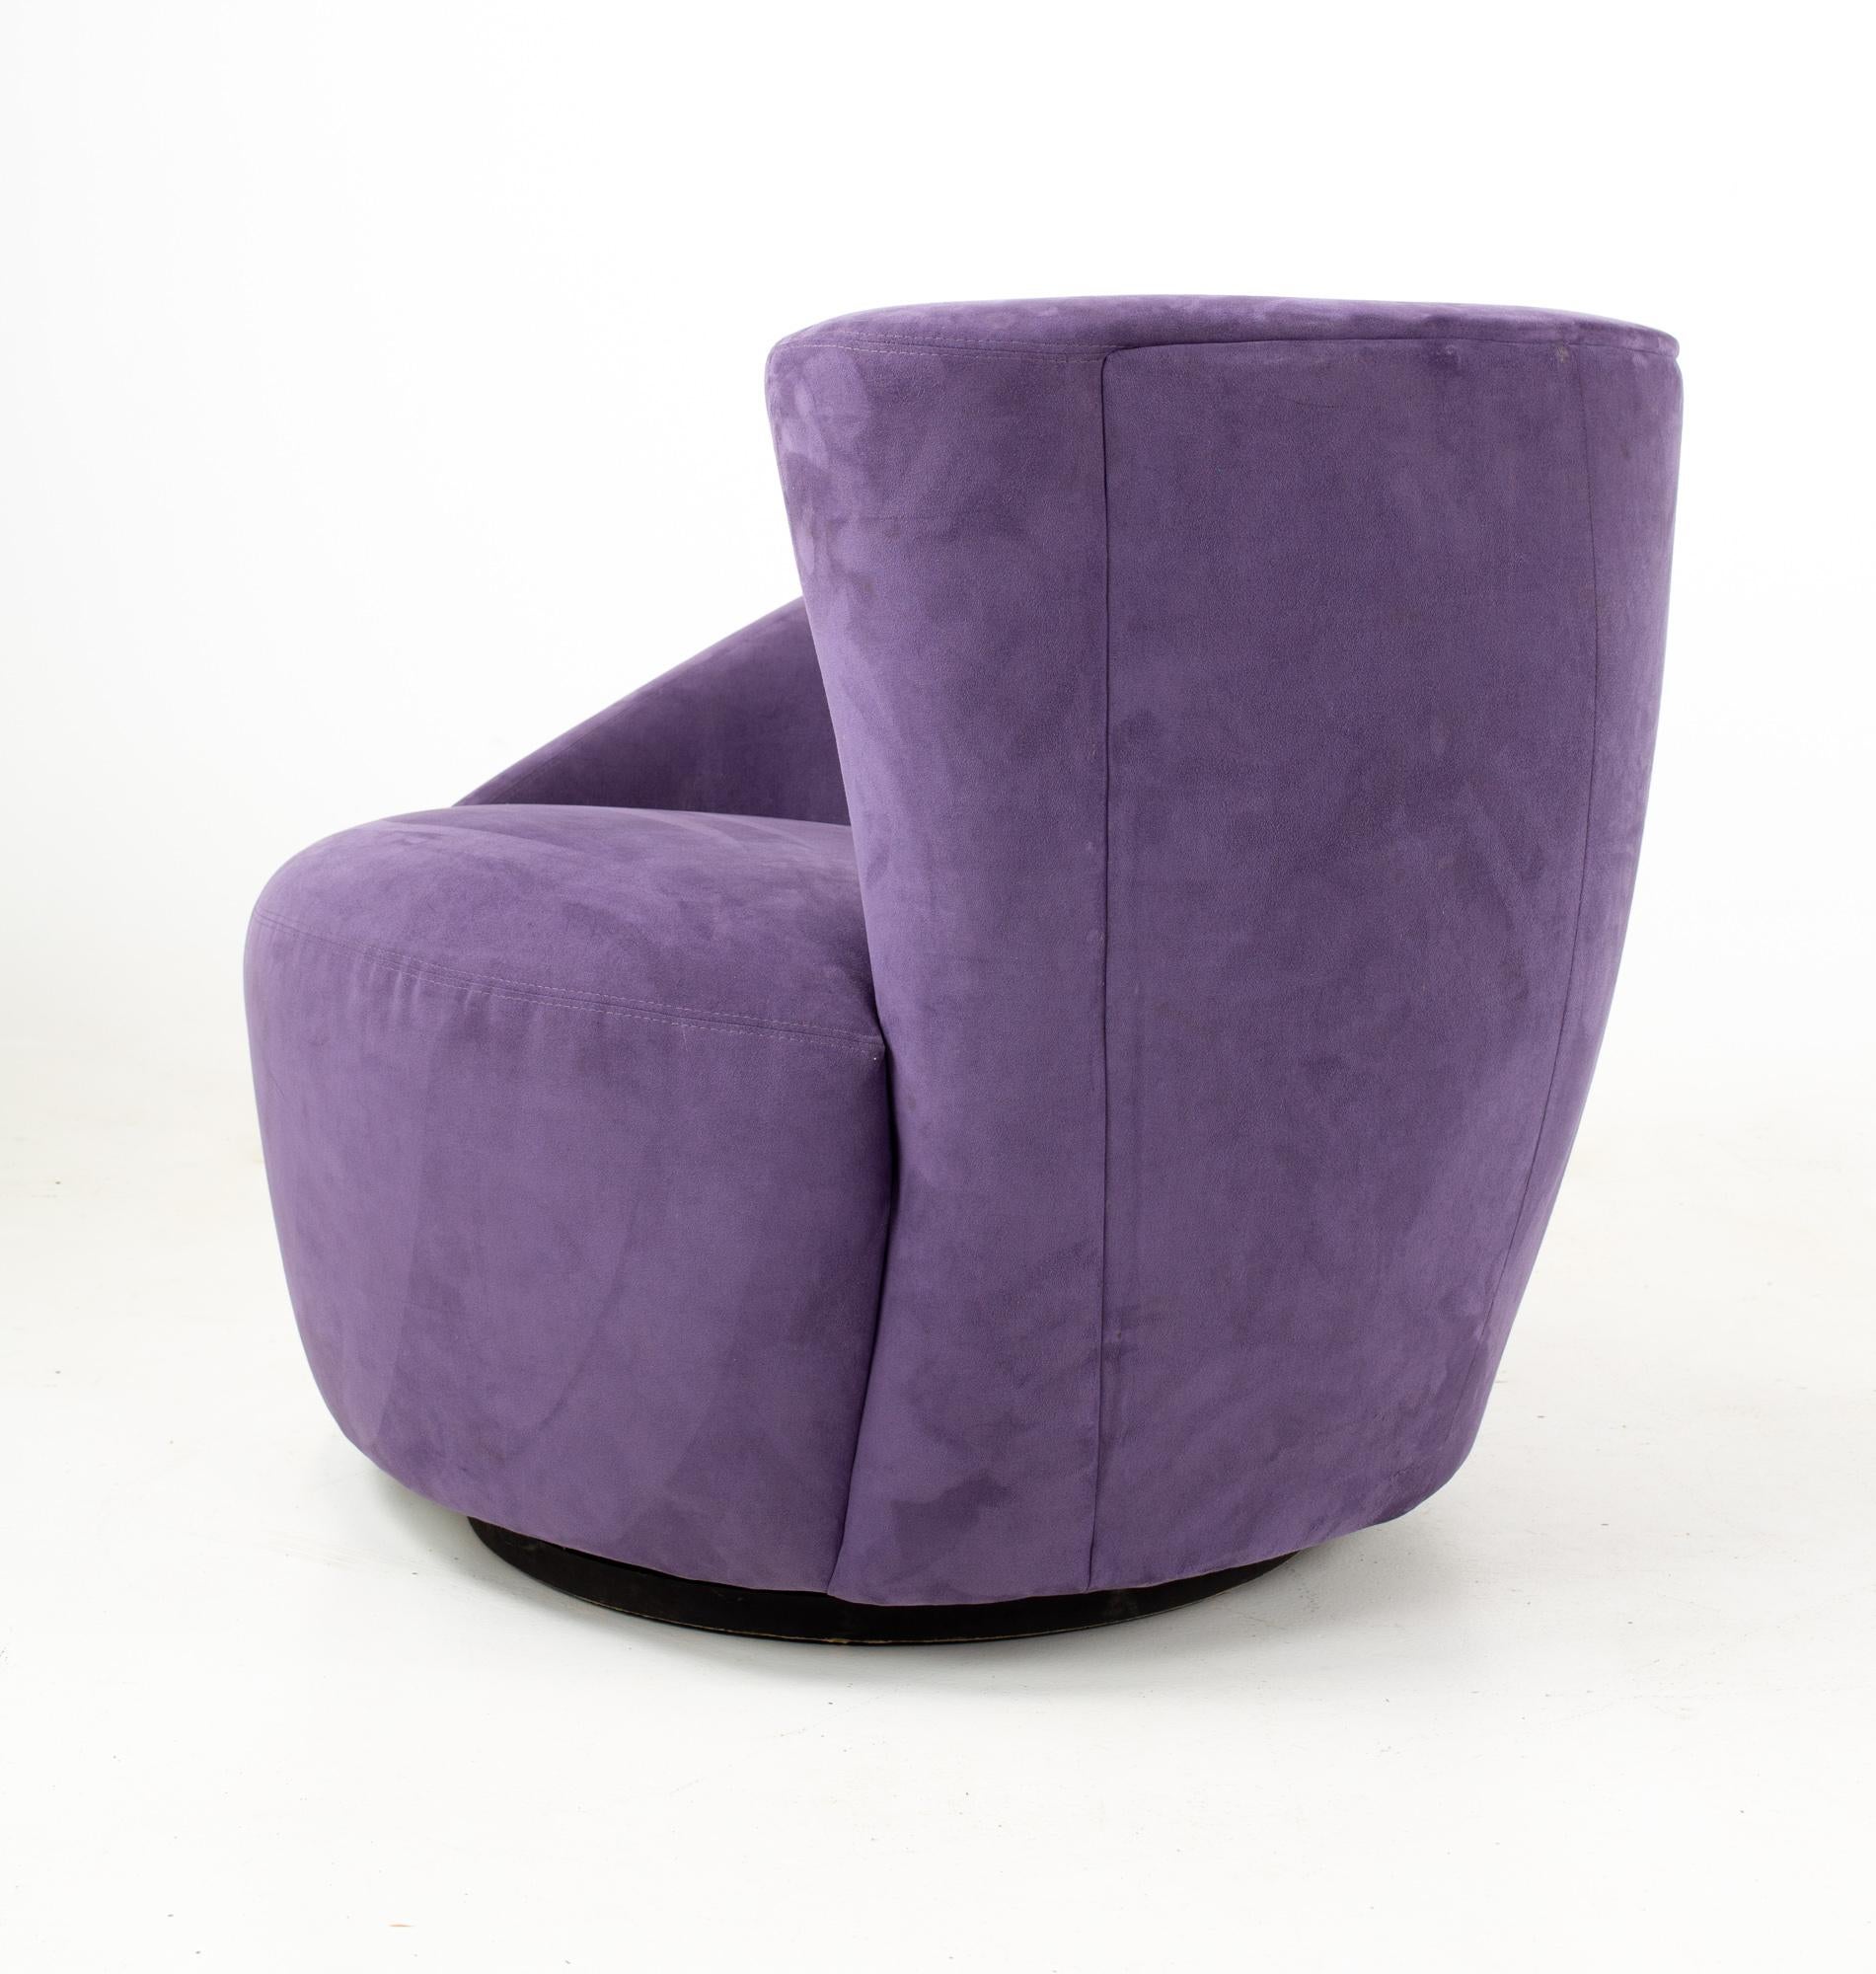 Weiman midcentury purple nautilus chair.
Chair measures: 36 wide x 36 deep x 29.75 high, with a seat height of 17 inches

All pieces of furniture can be had in what we call restored vintage condition. That means the piece is restored upon